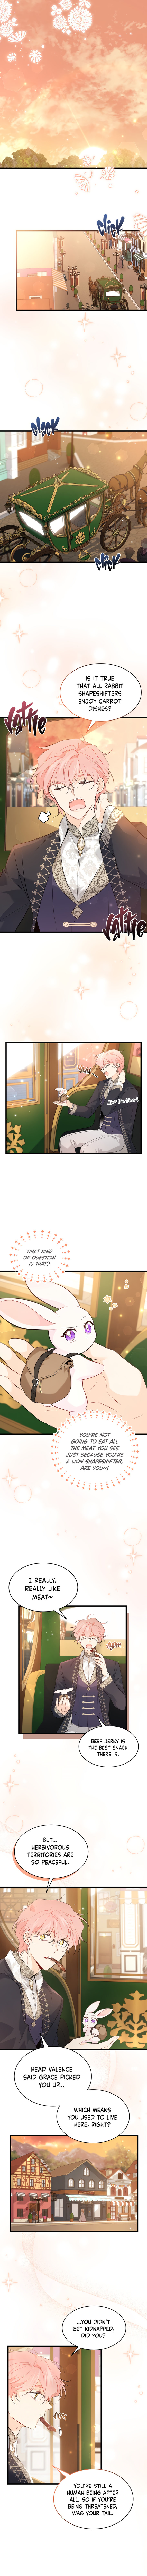 The Symbiotic Relationship Between A Rabbit and A Black Panther - Chapter 62 Page 2